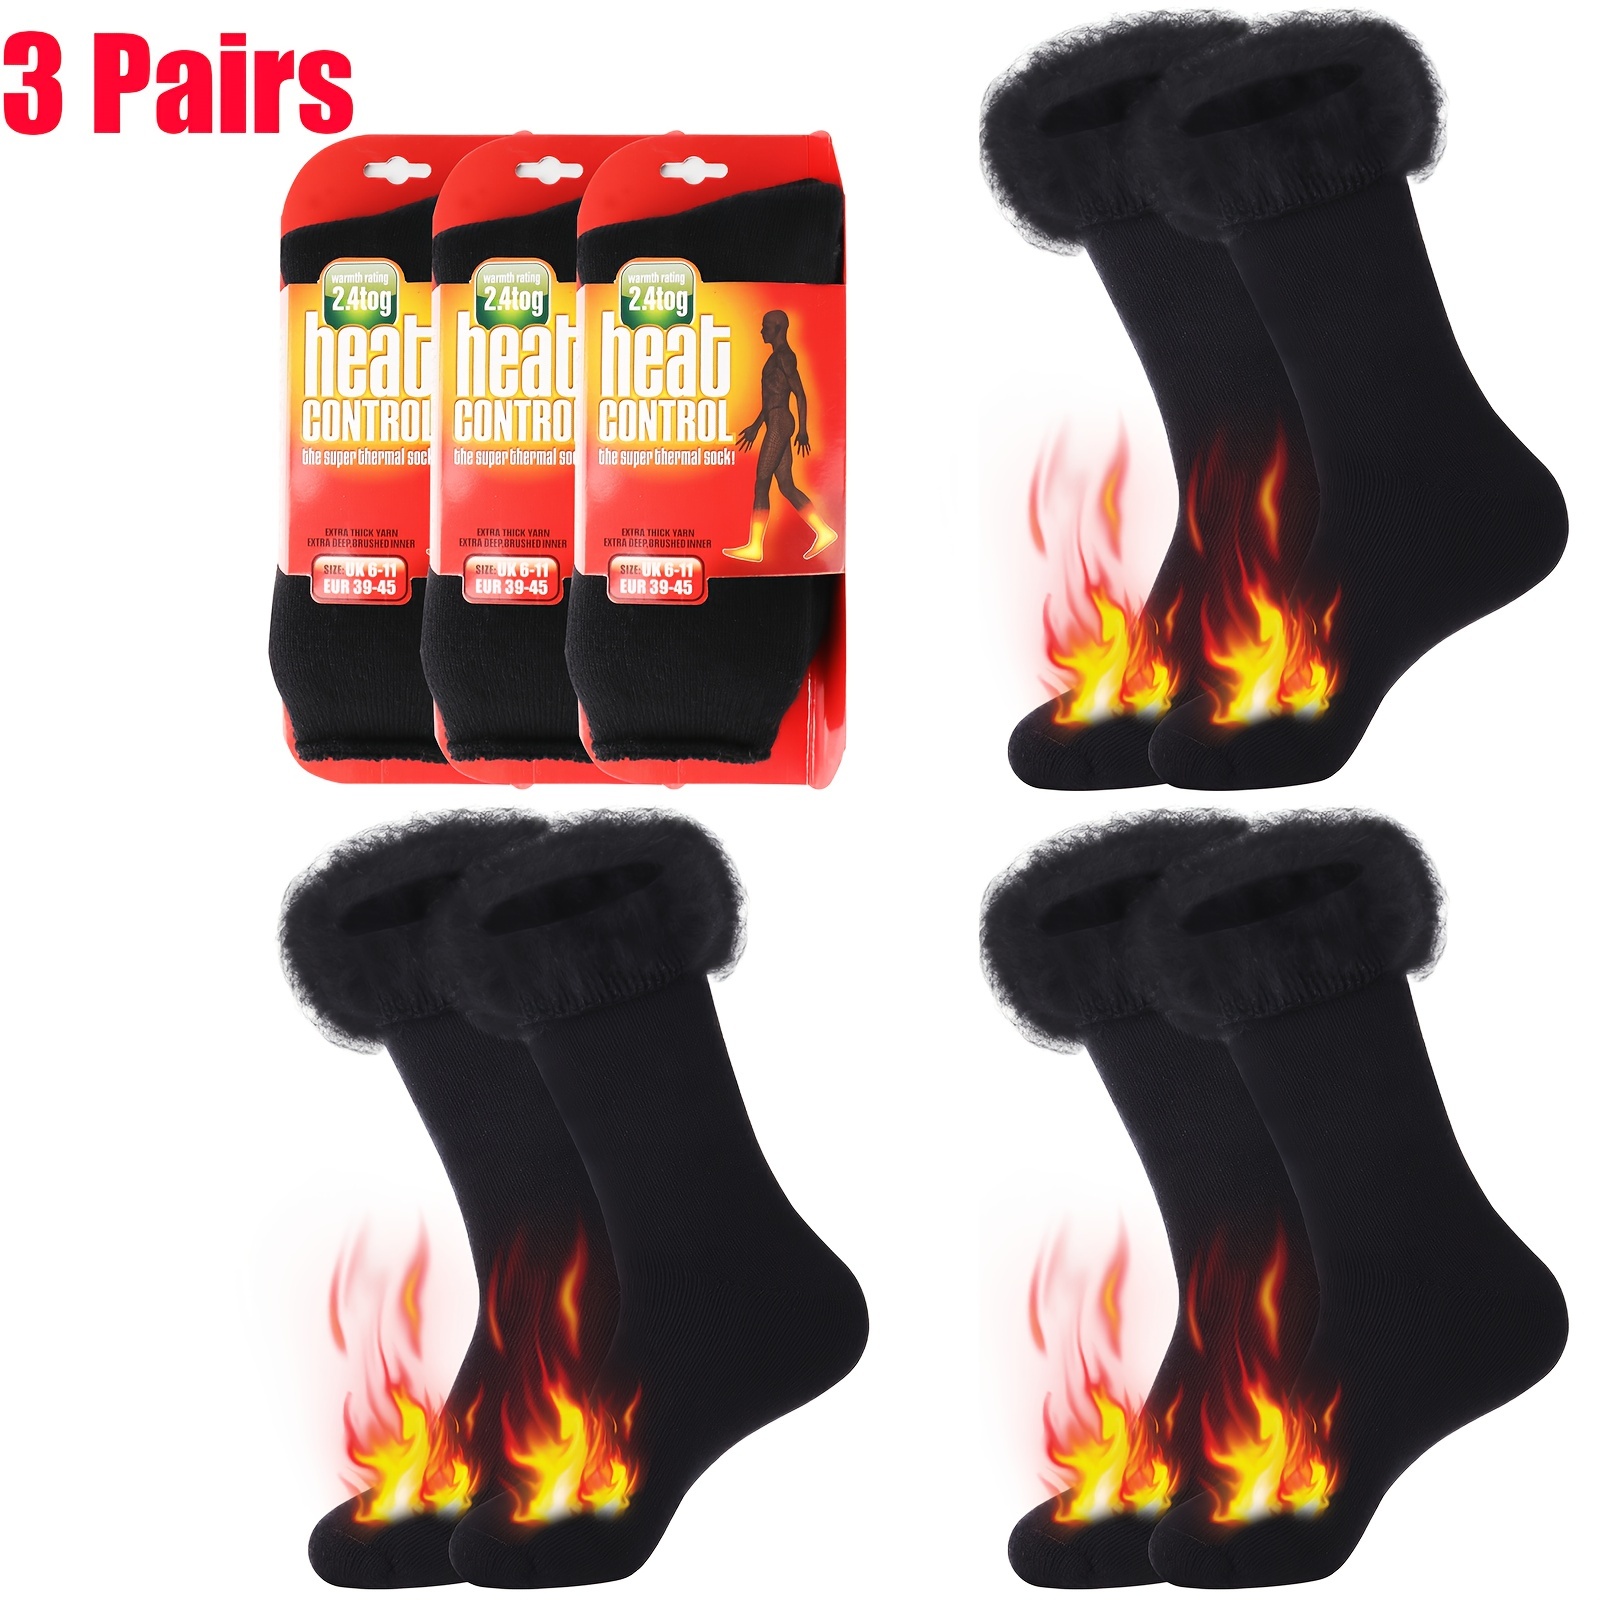 

2/3 Pairs Men's Heat Socks Winter Warm Thermal Socks For Men Extra Thick Insulated Crew Boot Socks For Extreme Cold Weather